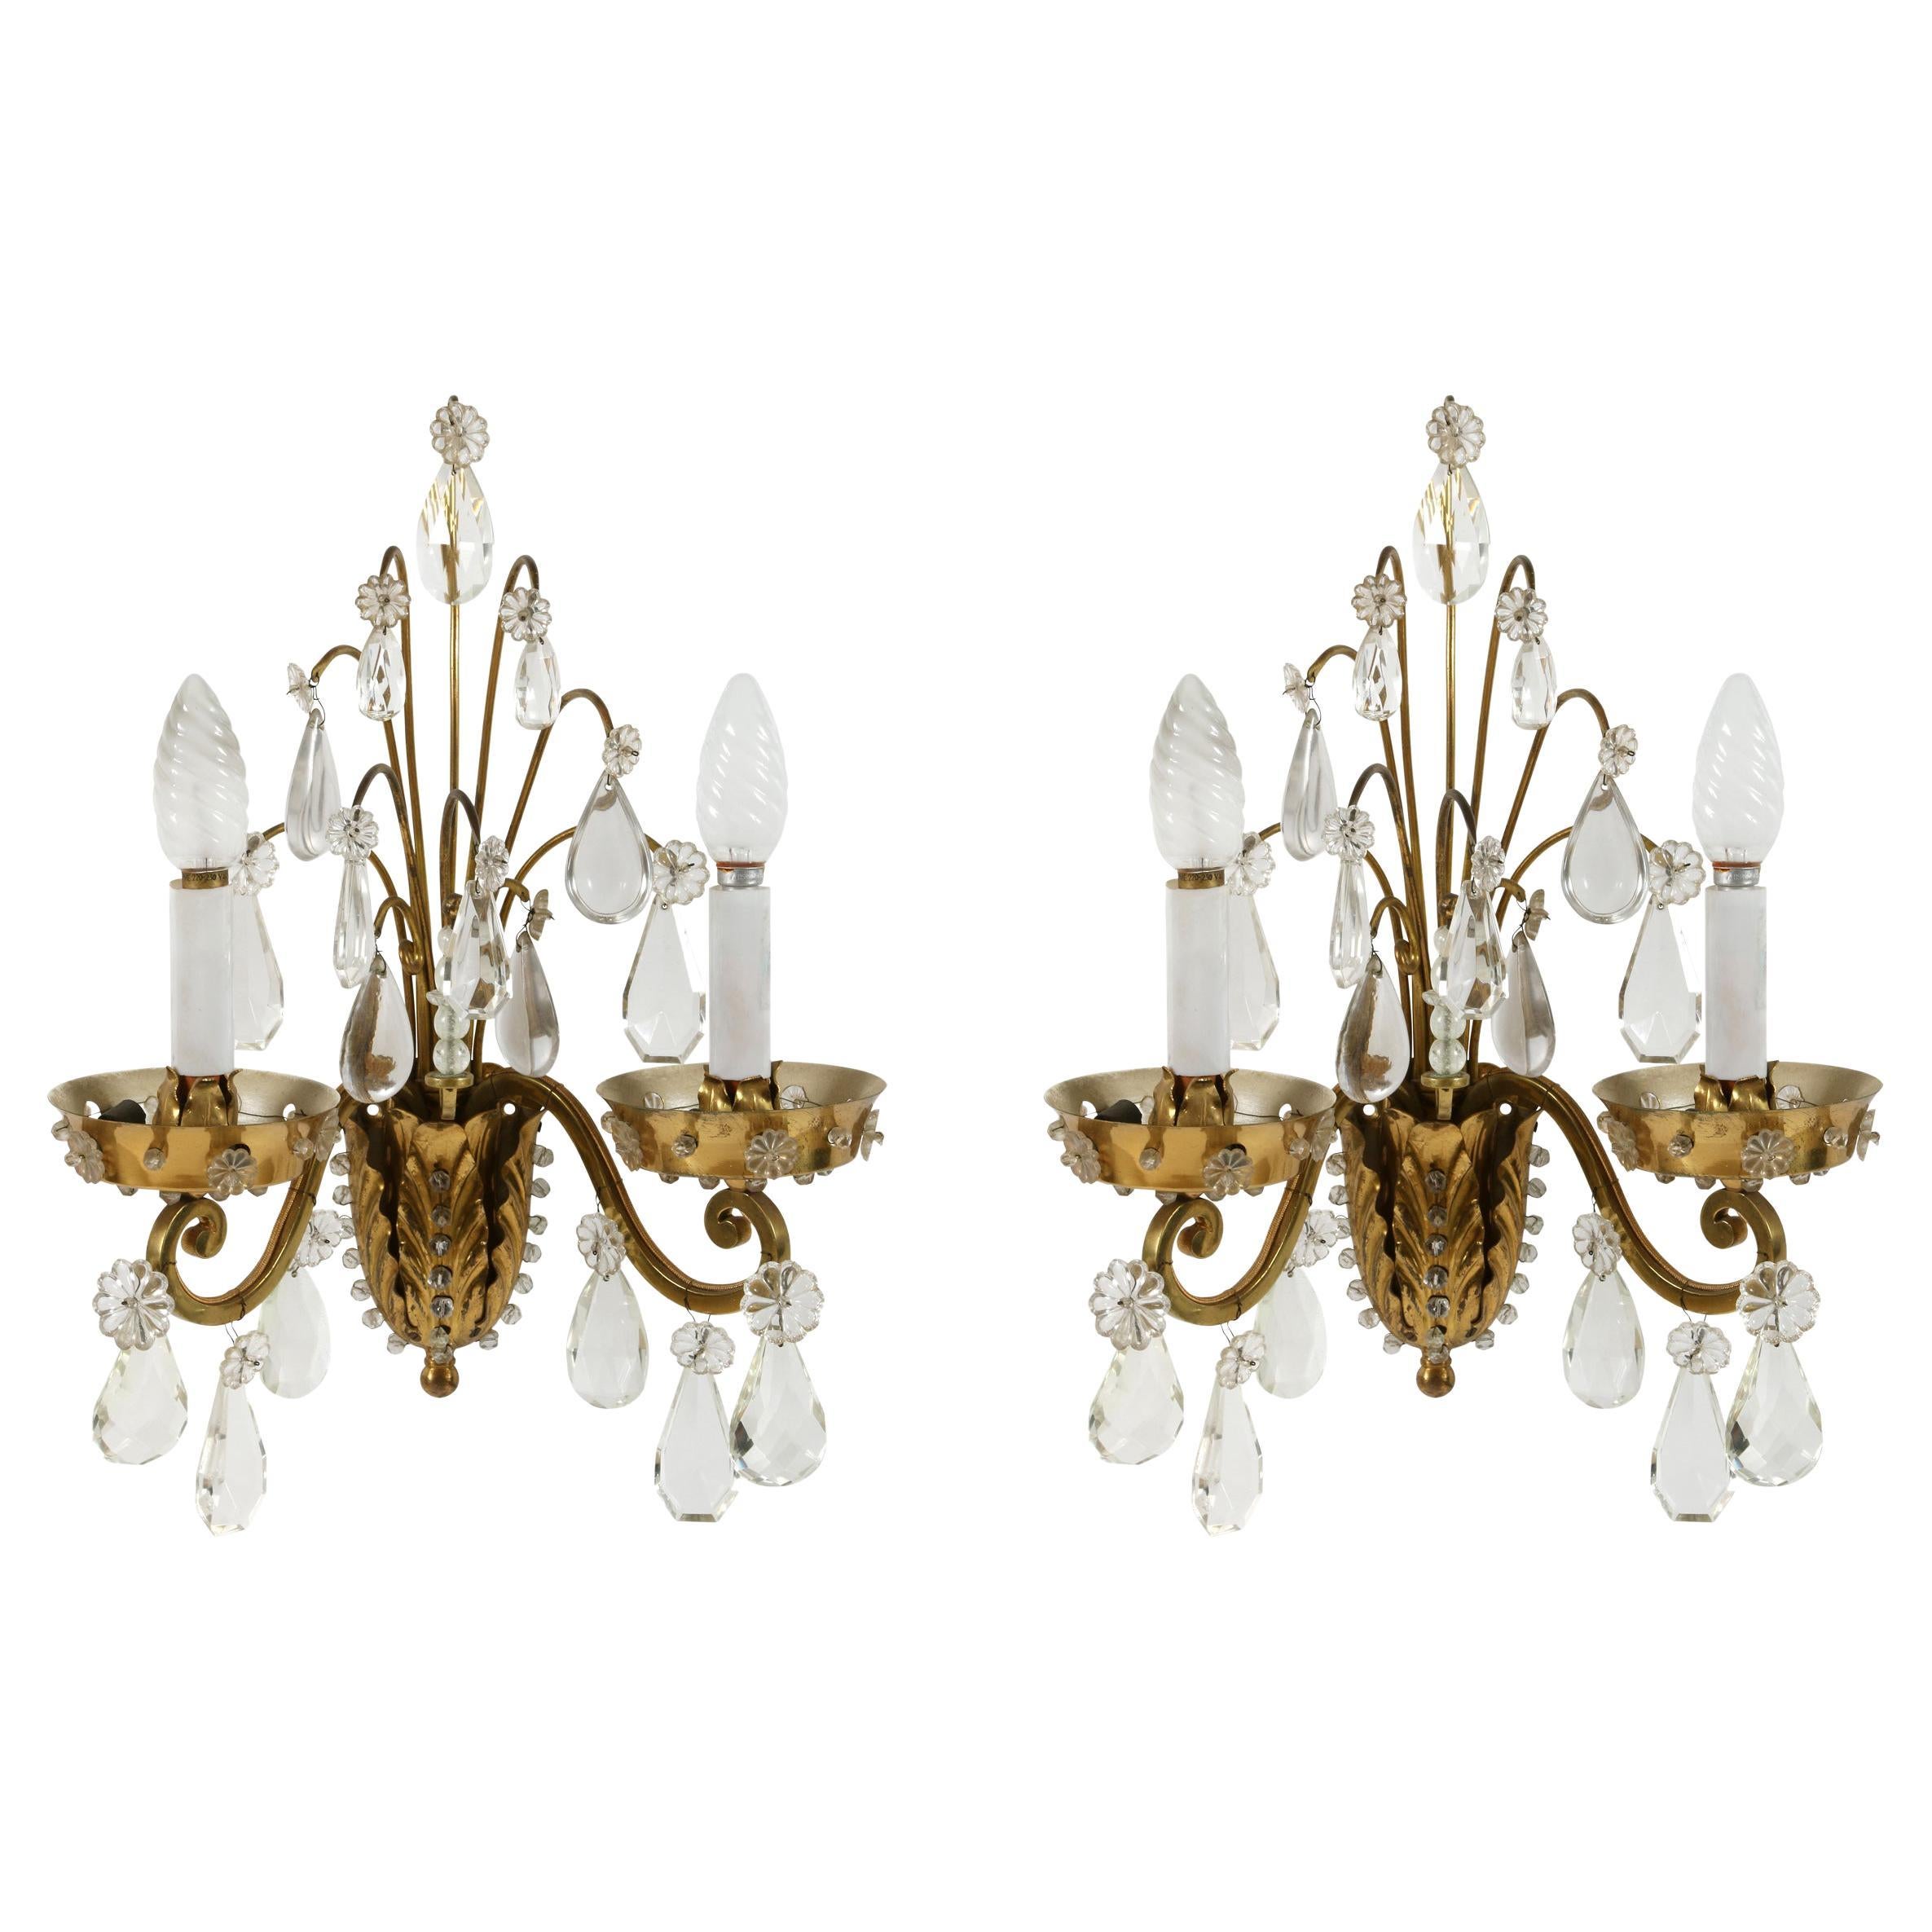 Pair of Jansen Style Two Arm Brass Sconces with Attached Crystals